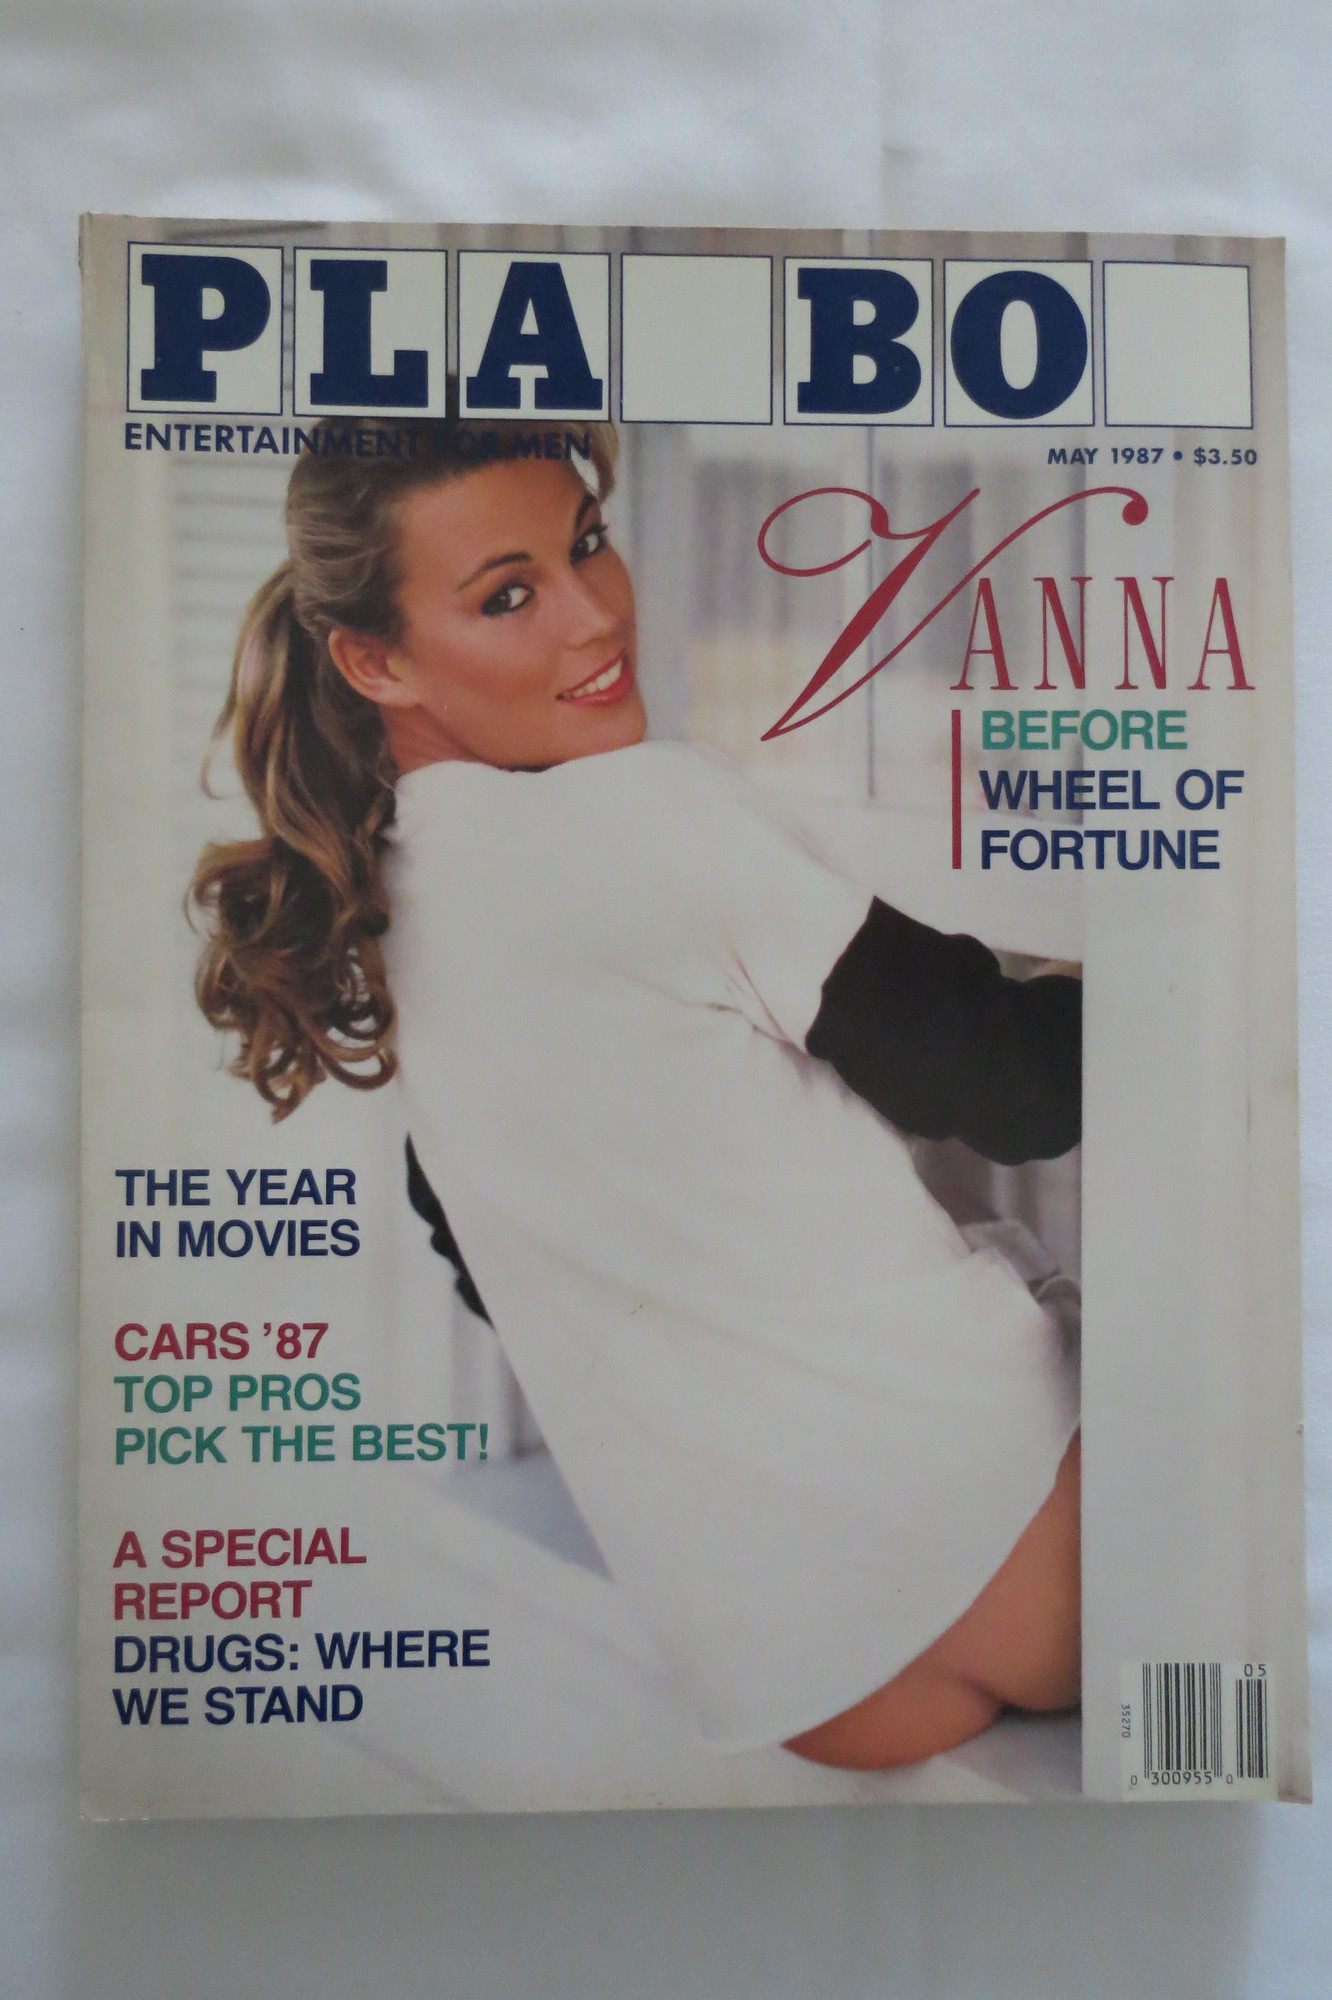 Ever in playboy vanna white was 